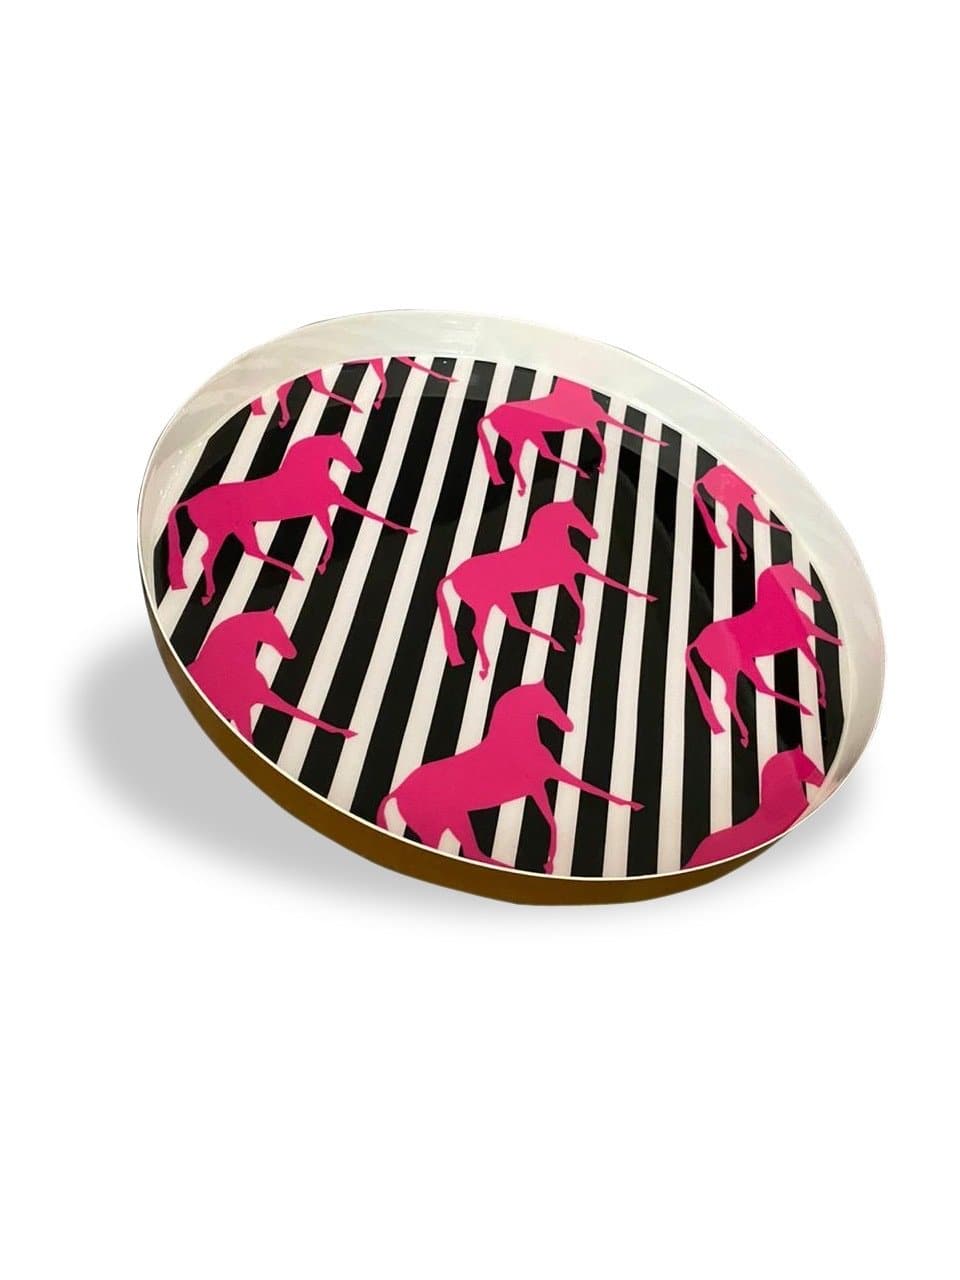 Home Digital Art Pink horse Serving Tray (12" inches) - The Decor Circle